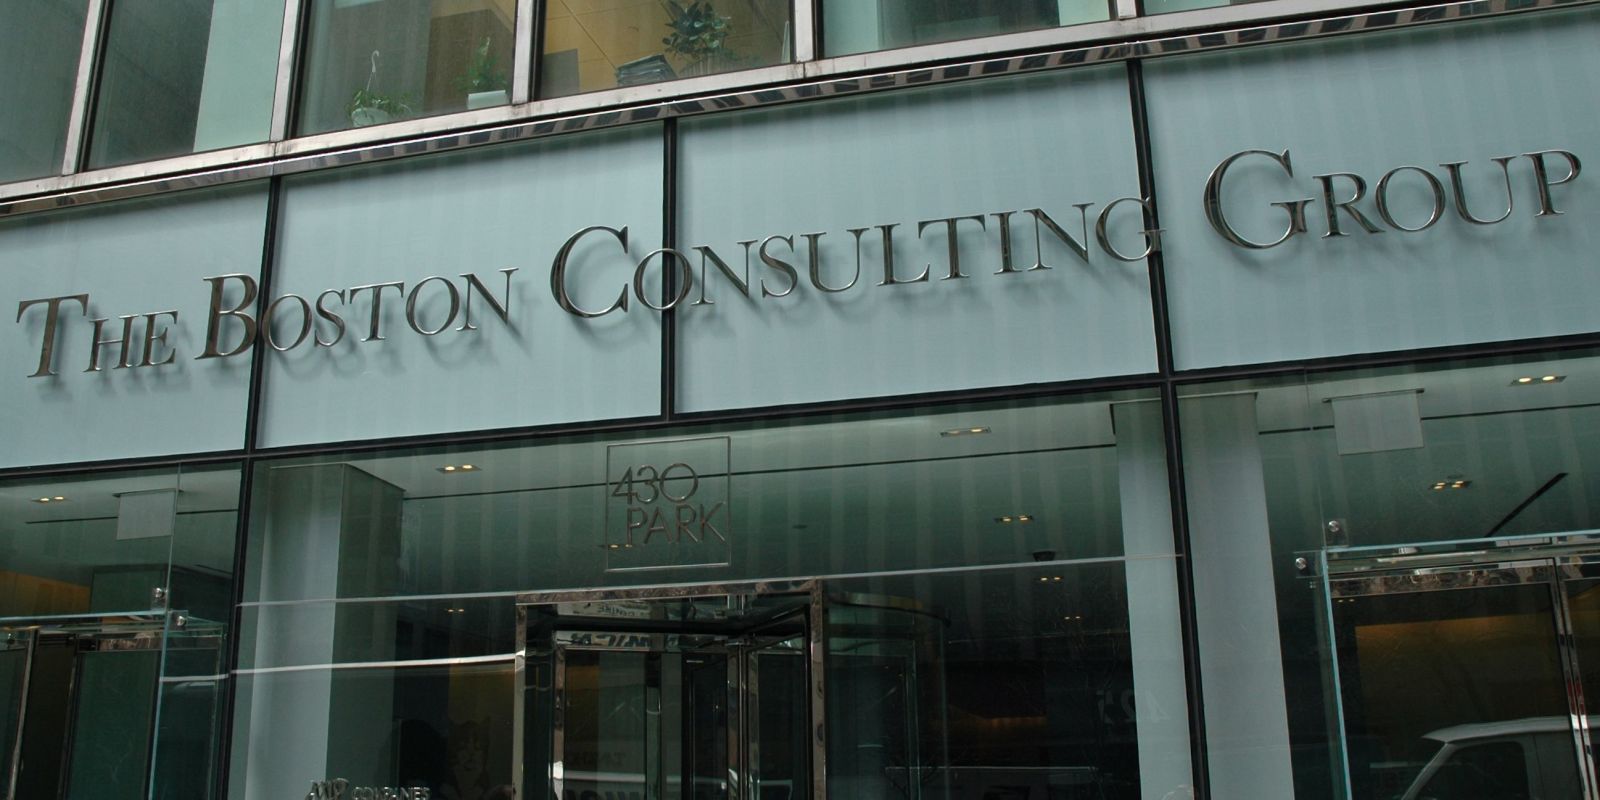 The Boston Consulting Group (BCG) -- a global management consulting firm with 82 offices in 46 countries – published Made in America, Again, which was one of the first reports to acknowledge the reshoring trend.